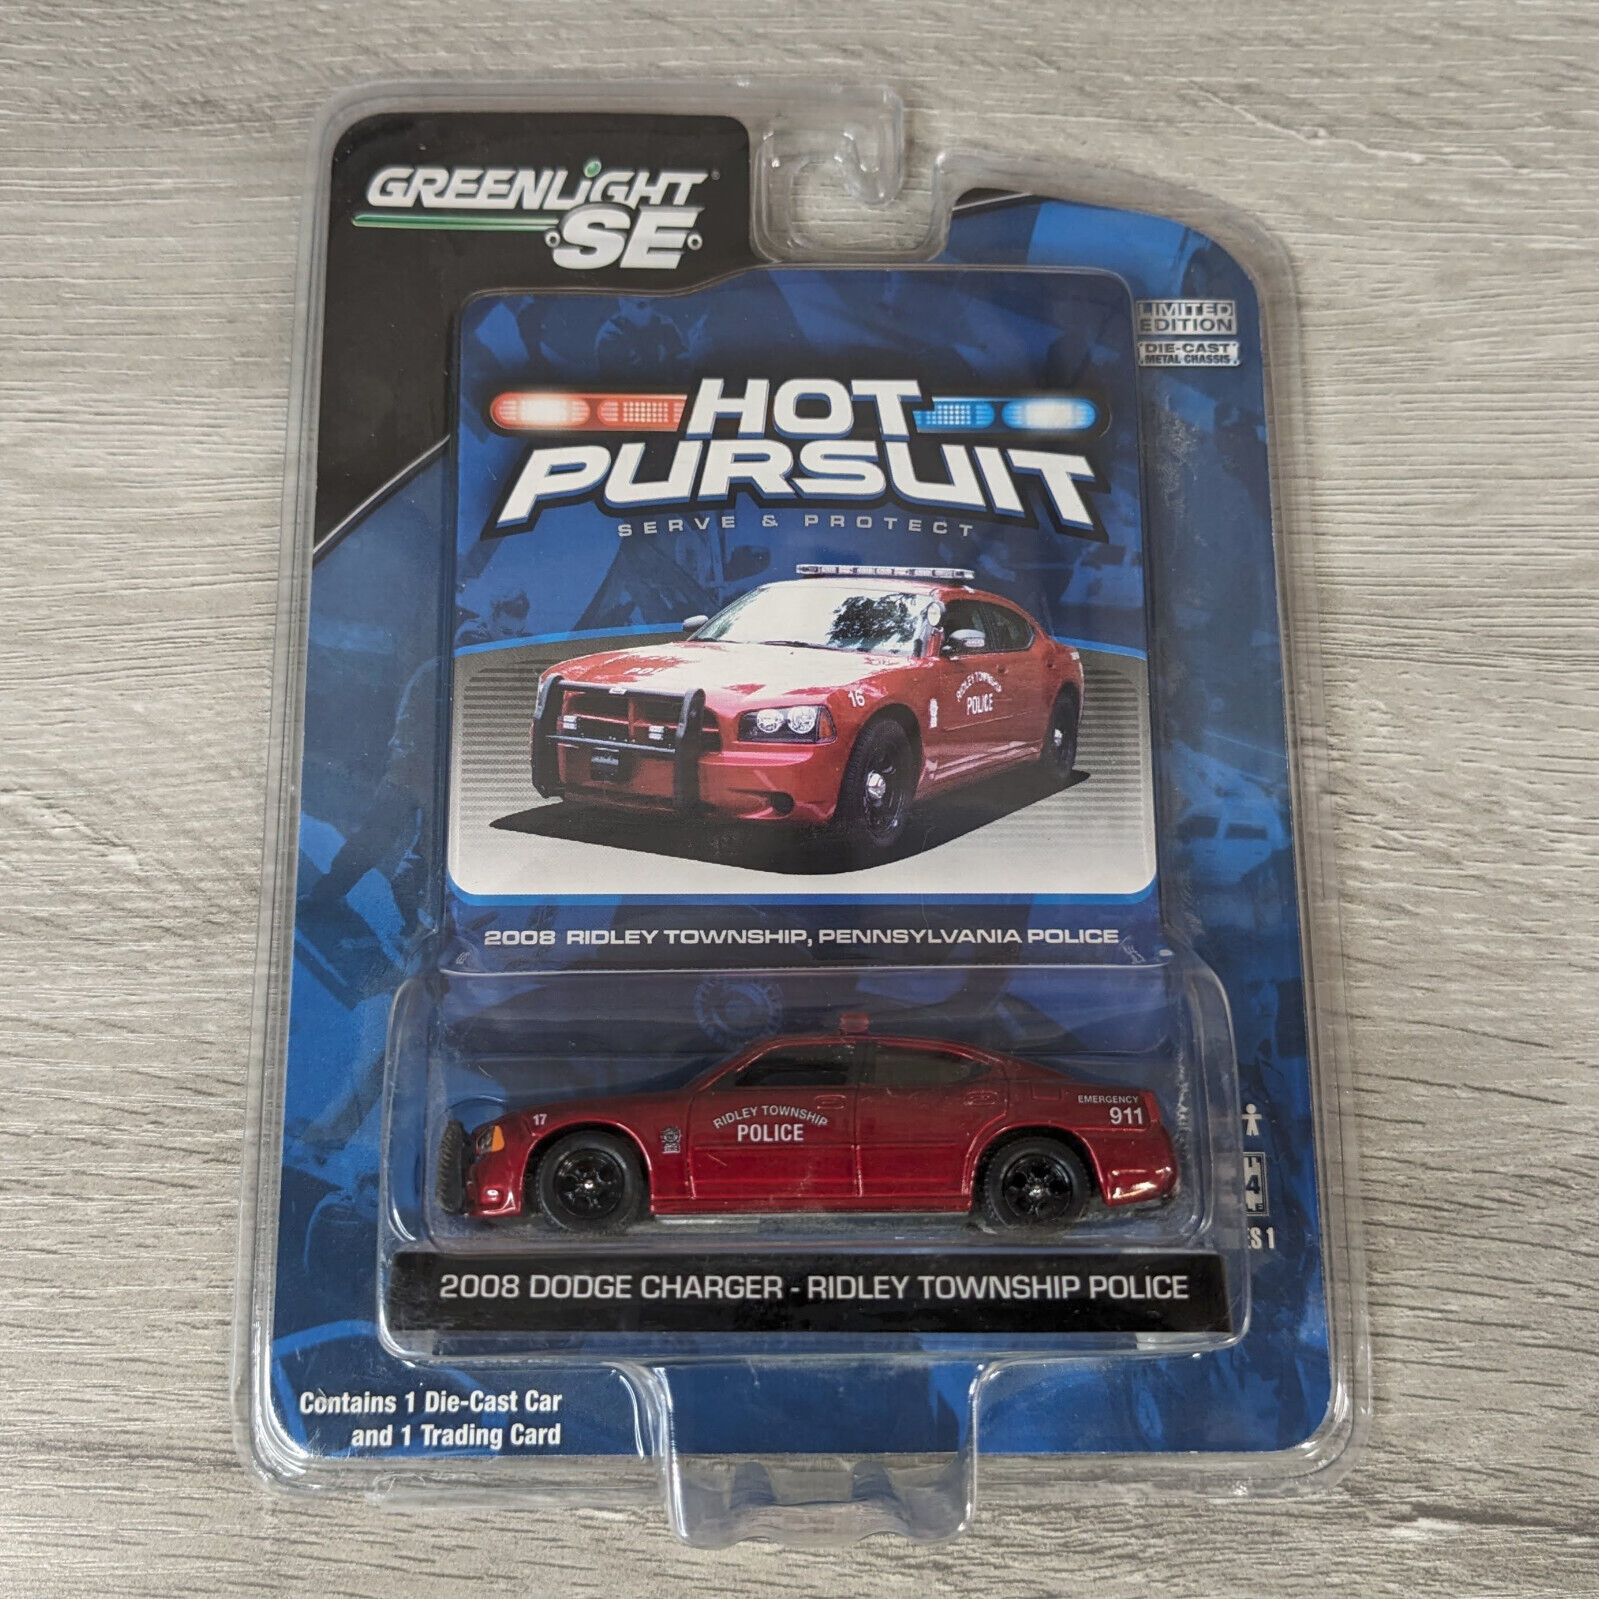 Primary image for Greenlight SE Hot Pursuit 2008 Dodge Charger - Ridley Township, PA - New